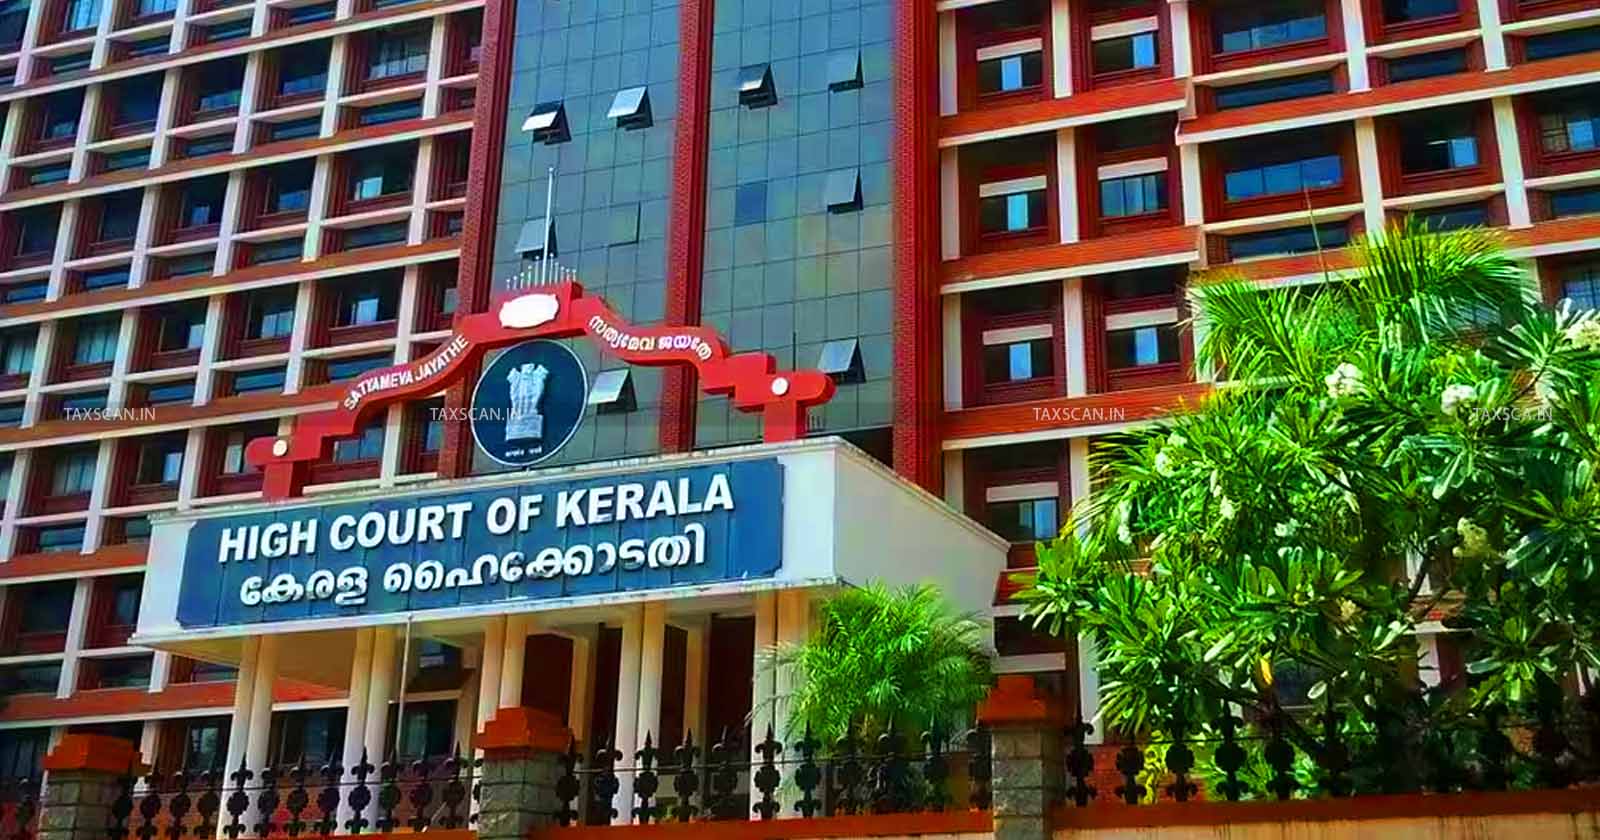 One Time Settlement - Tax due - Tipper Lorry - kerala hc - kerala high court - Competent Authority - One Time Settlement of Tax - TAXSCAN